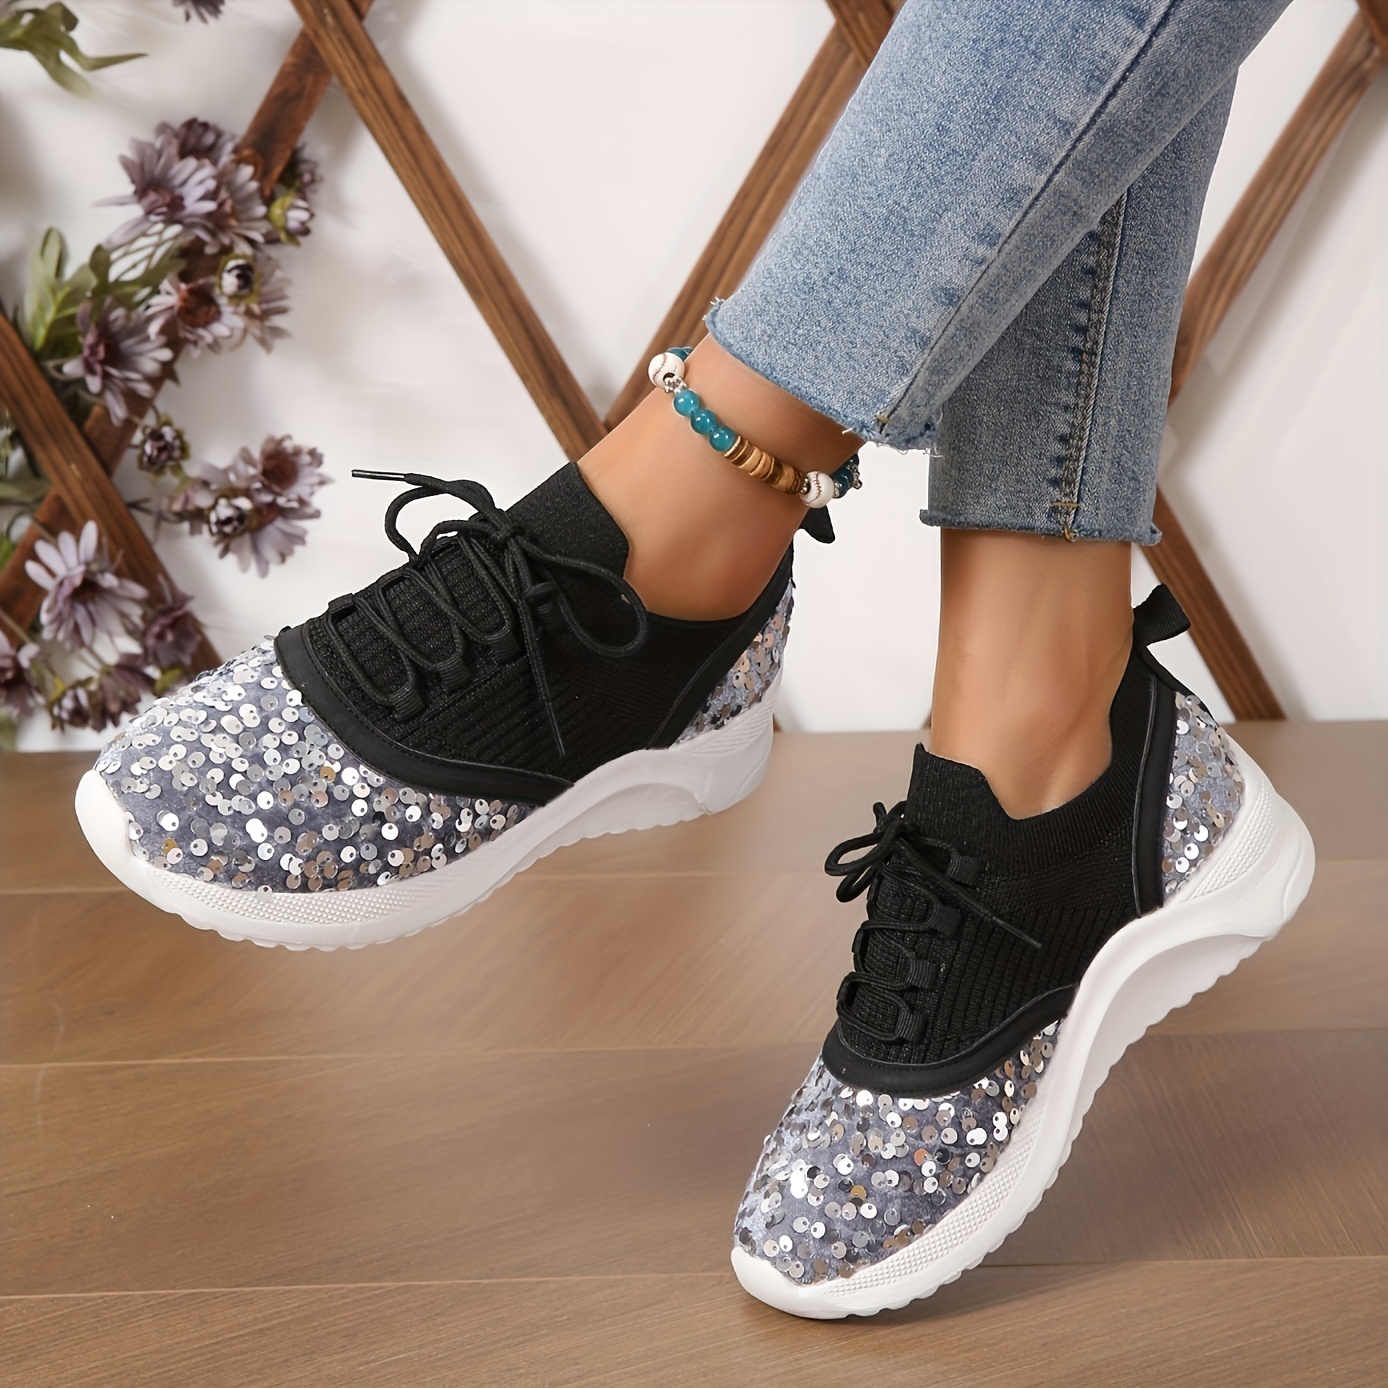 Autumn Shiny Womens Sneakers, Sneakers Woman Sequins